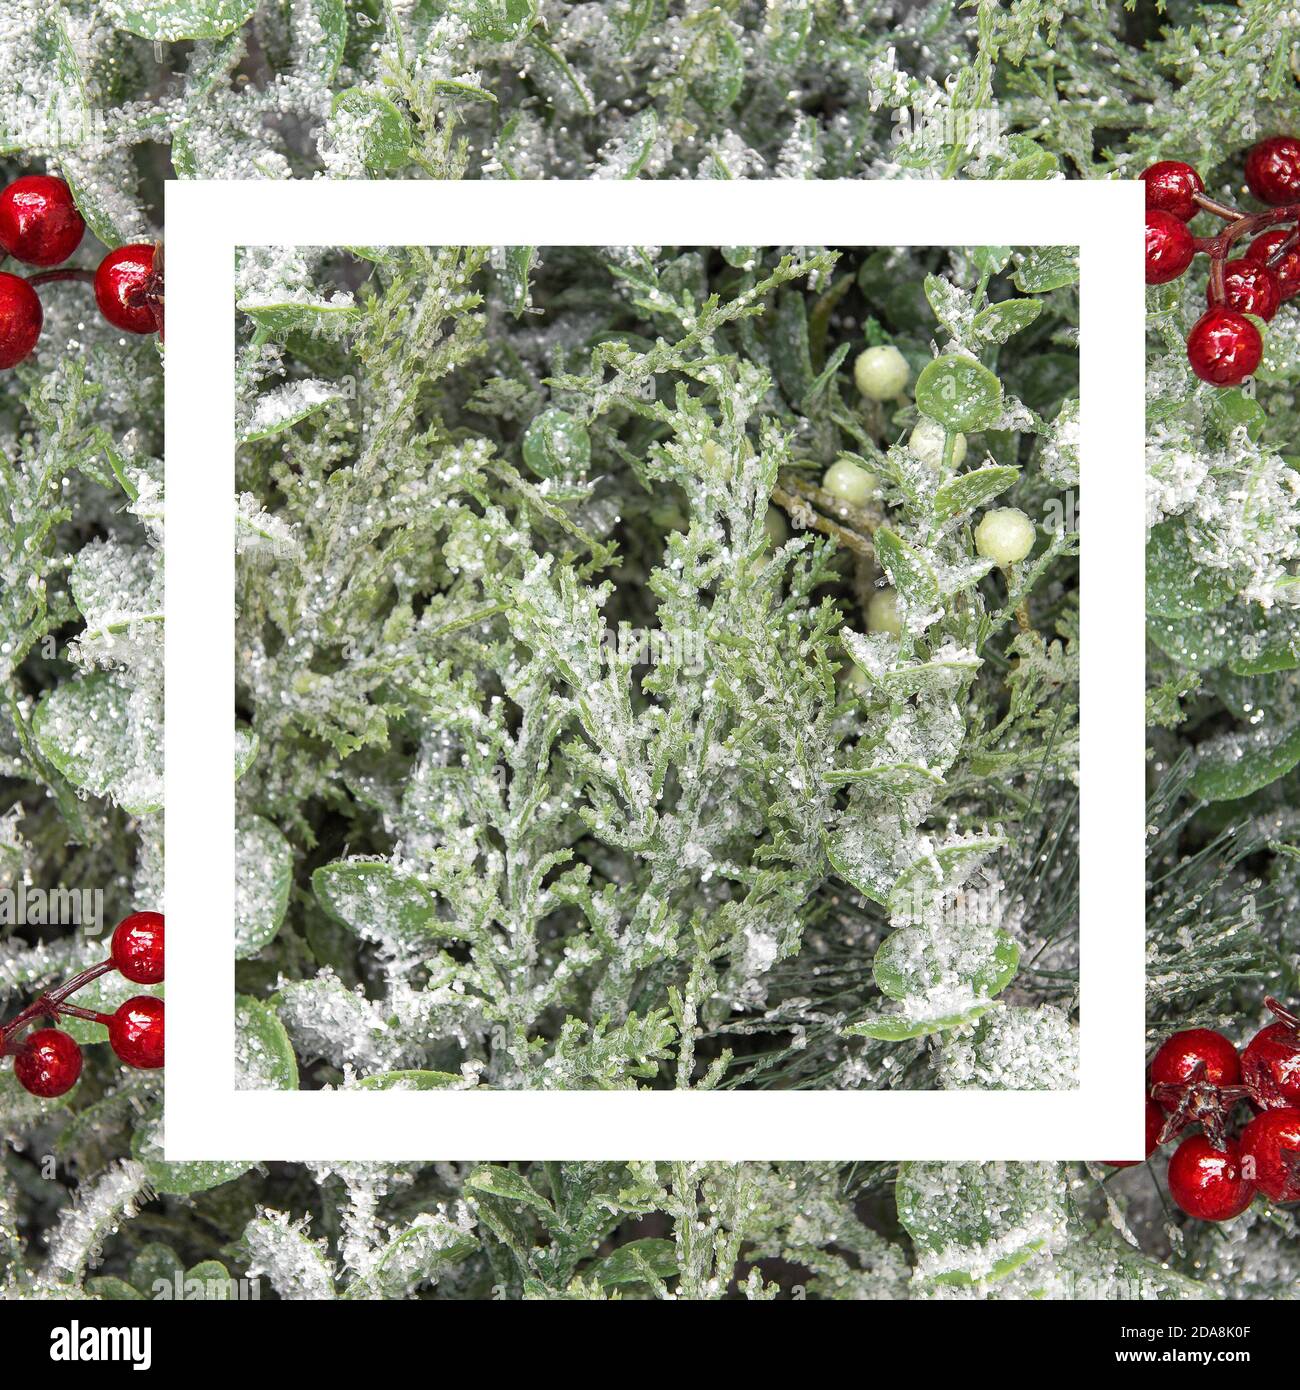 White frame with Christmas background. Pine tree branches red berries decoration Stock Photo